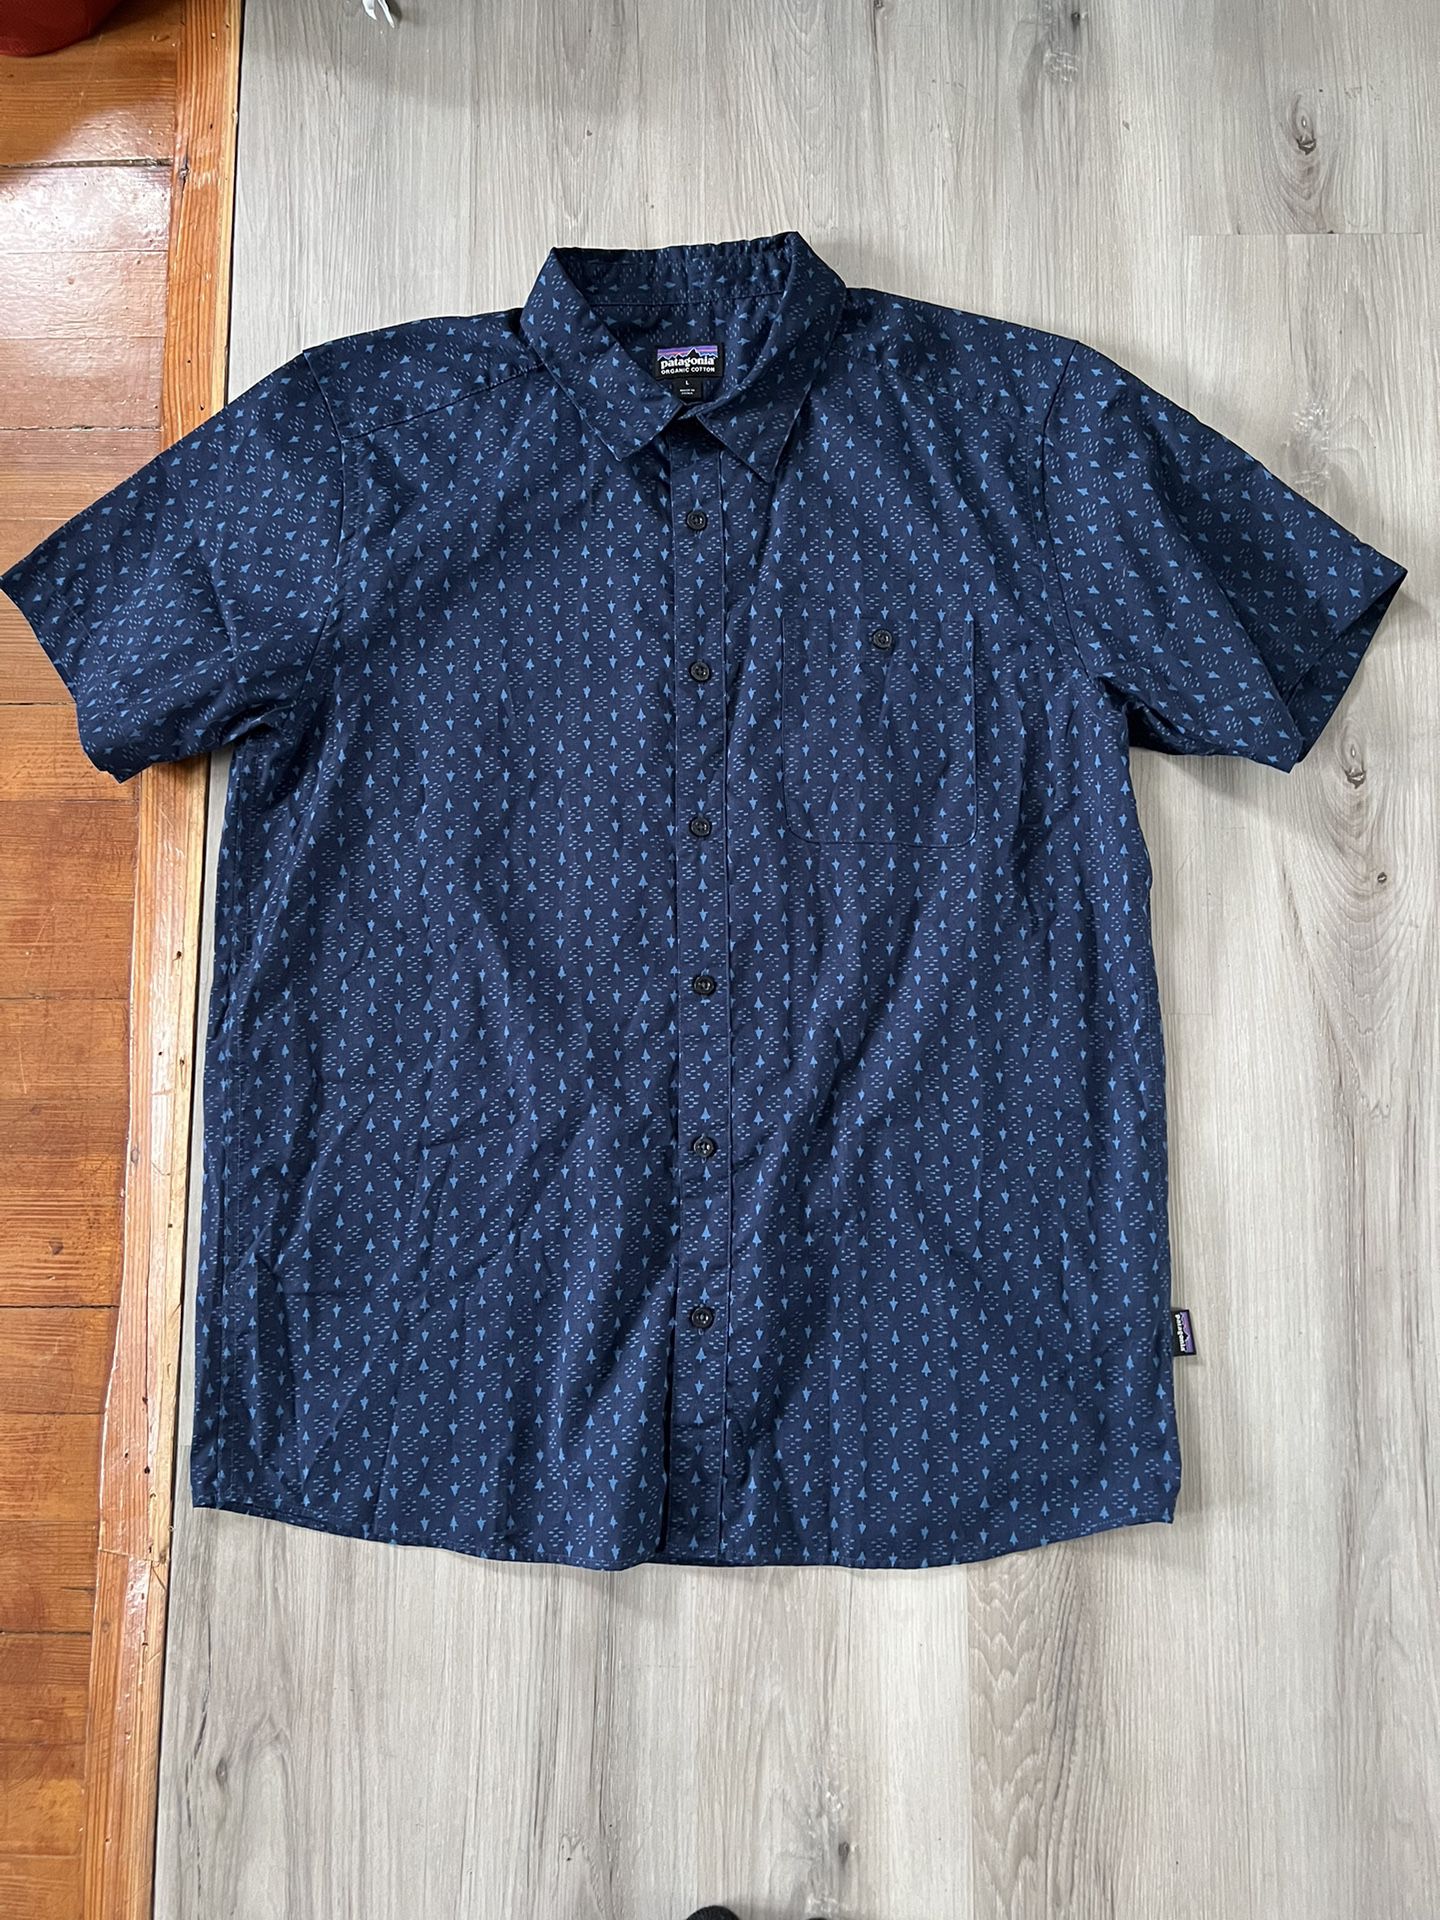 Patagonia Short Sleeve Button Down 